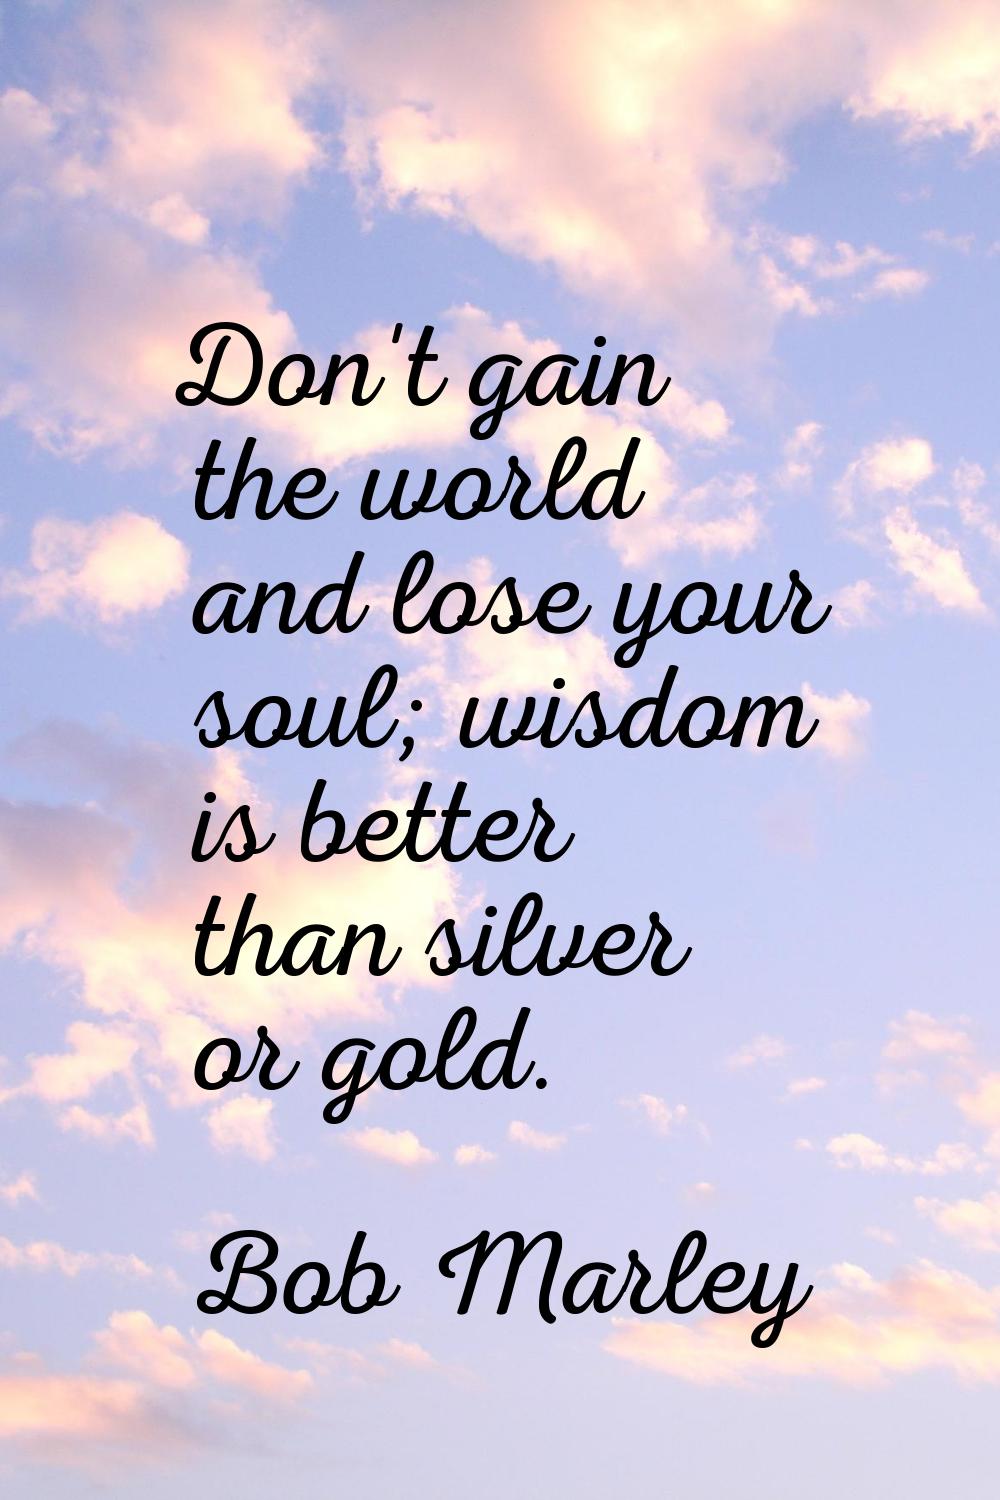 Don't gain the world and lose your soul; wisdom is better than silver or gold.